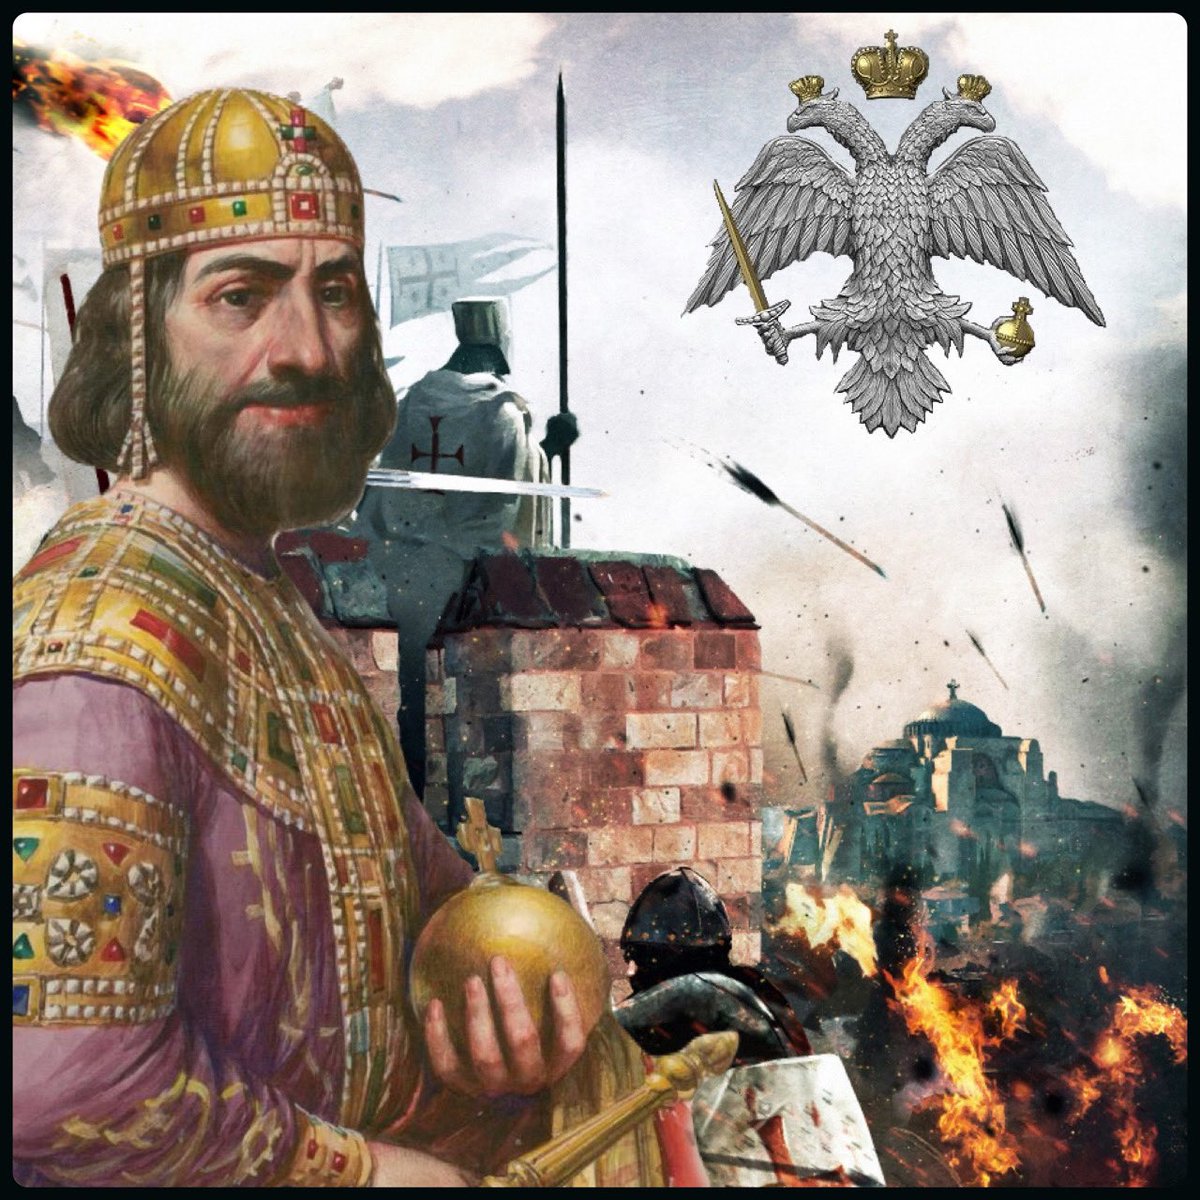 Manuel Komnenos was the most powerful Roman Emperor of the 12th century. But 24 years after his death Constantinople was sacked by the Fourth Crusade.

Manuel increased Western expectations of the Romans and left many unsolved problems behind.

Does he share any of the blame?